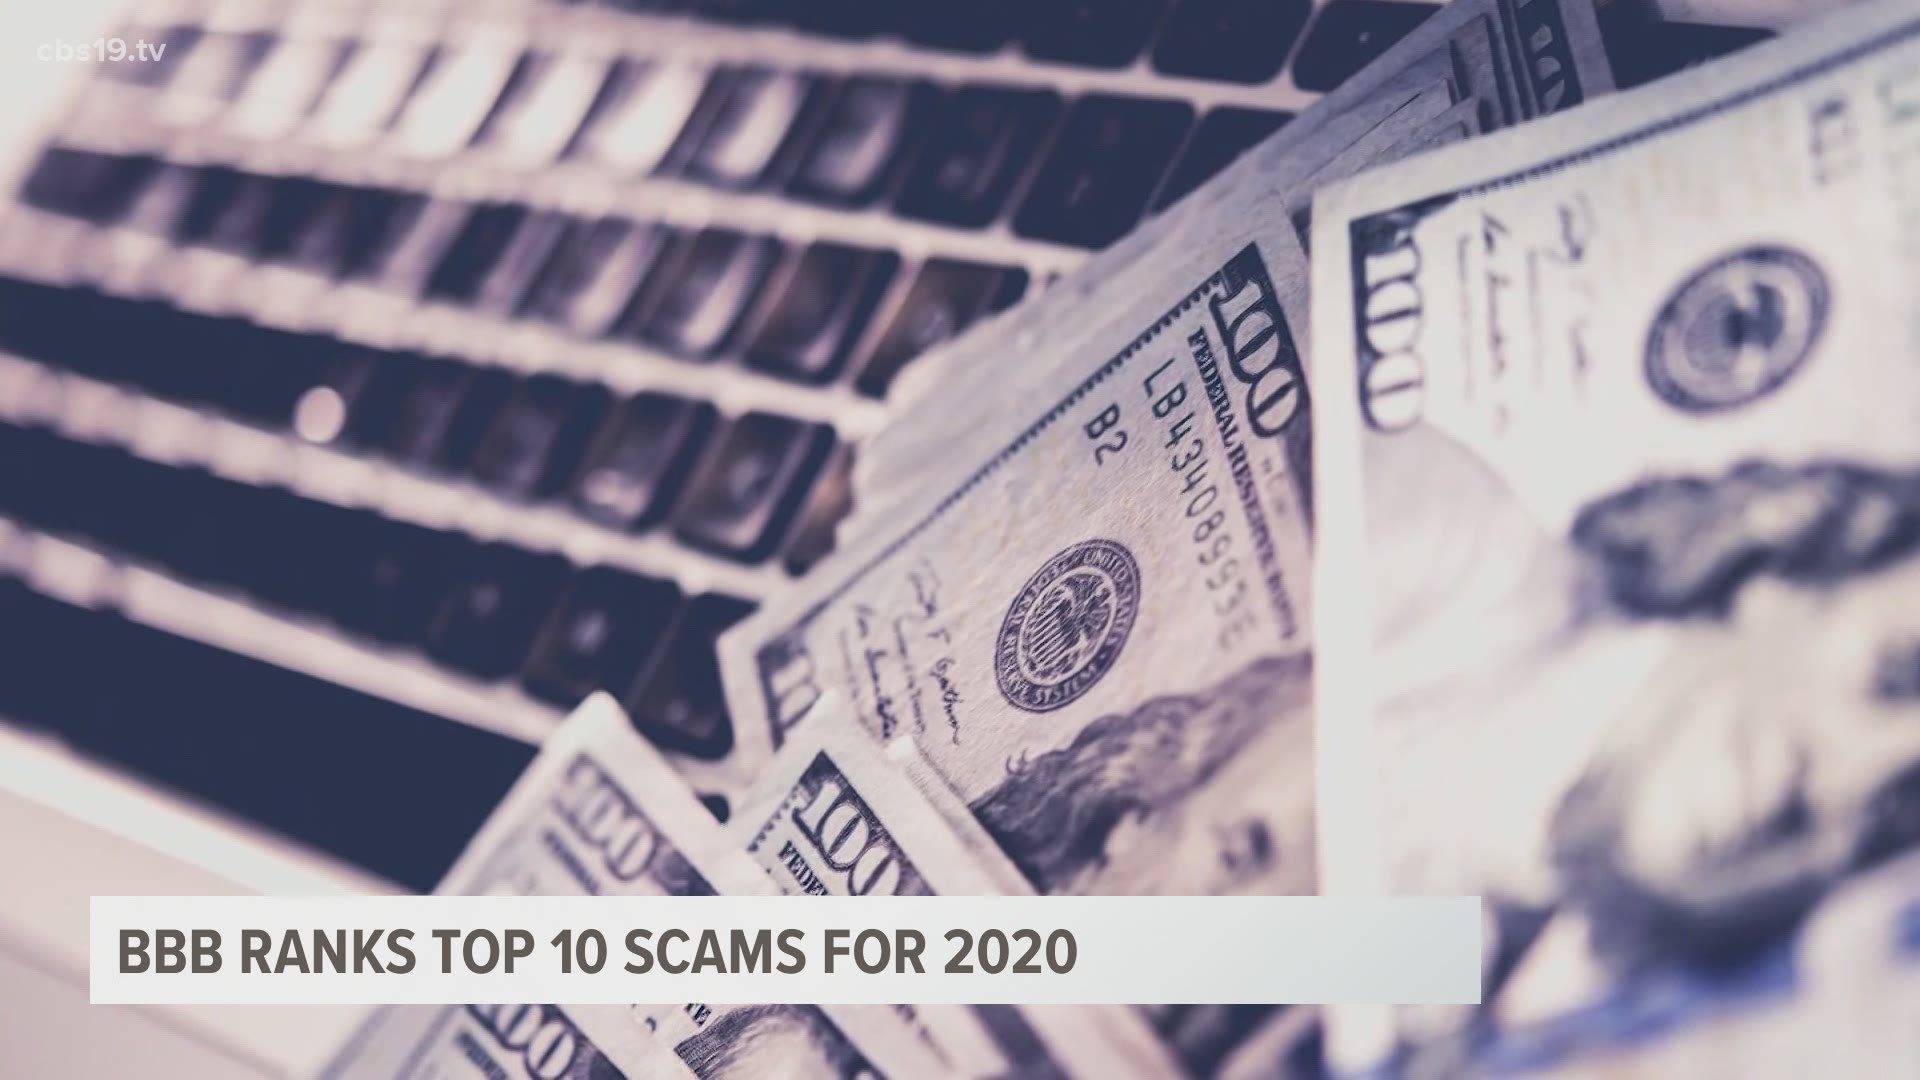 The Better Business Bureau serving East Texas has seen an increase in online scams during the pandemic.